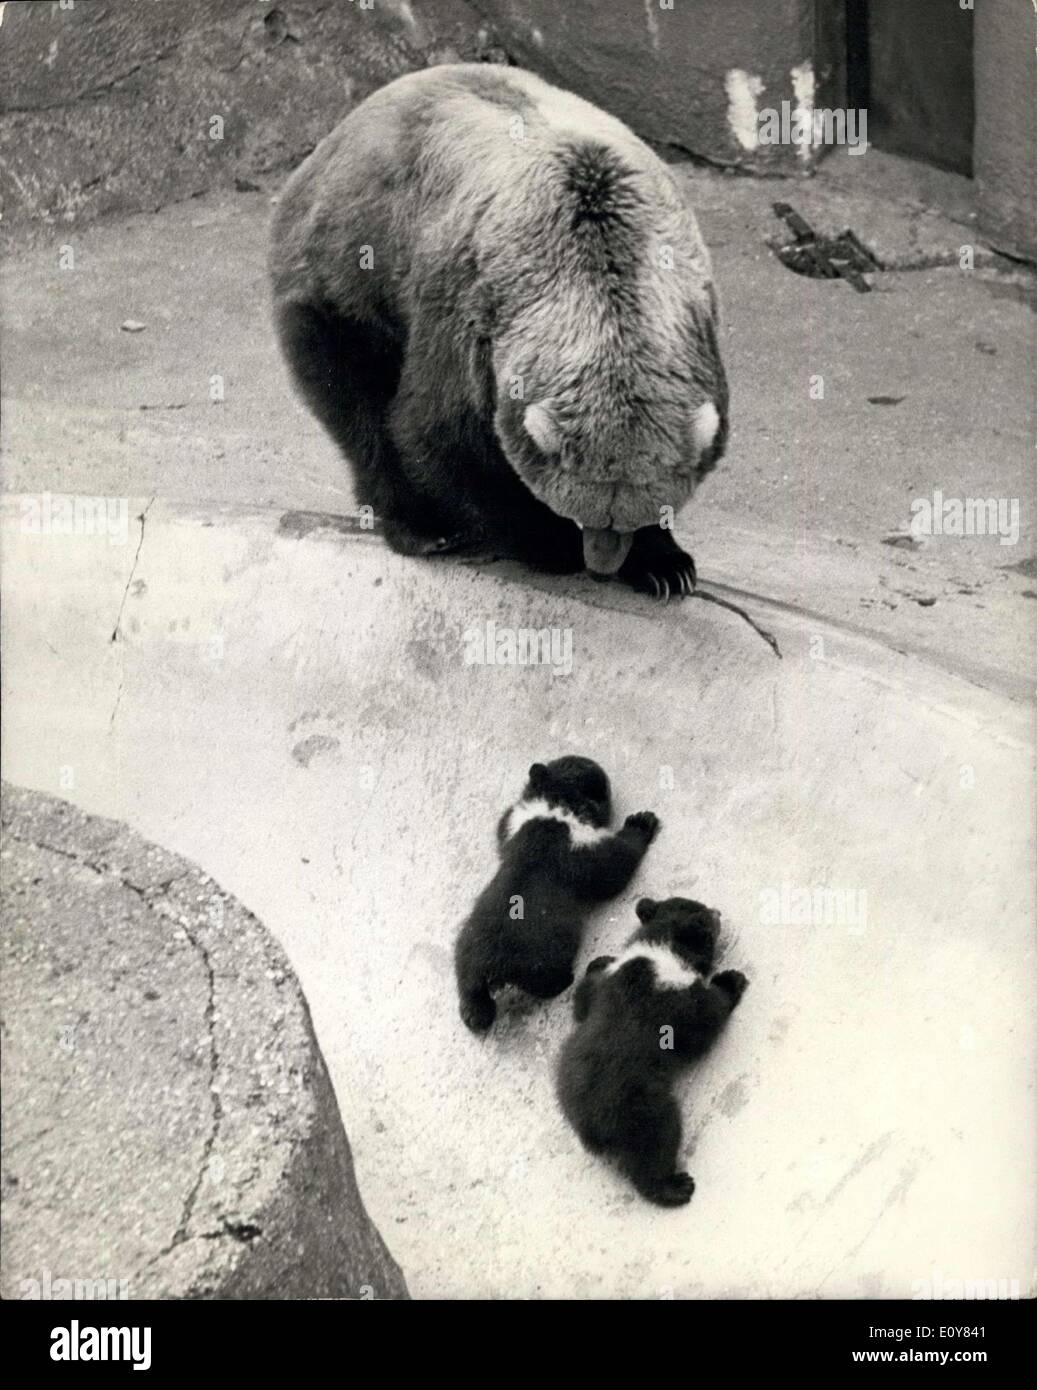 Apr. 12, 1969 - Debut For Rare Kodiak Bears At Whipanade: Out in the spring air for the first time today at the whipanade Zoo two male Kodiak Bear Cubs who were born on the 21st of January The bear cubs are called Duba and Reya, names of Icelandic Towns. The cubs are dark brown with white Collars and weight about 18 lbs. The parents are Wilma and Wilbur who are six years old ans came originally from Detroit Zoo,. This is their first litter of Cubs. and the third litter to be bred successfully at Whipanade Zoo, and in the whole if Britain Stock Photo